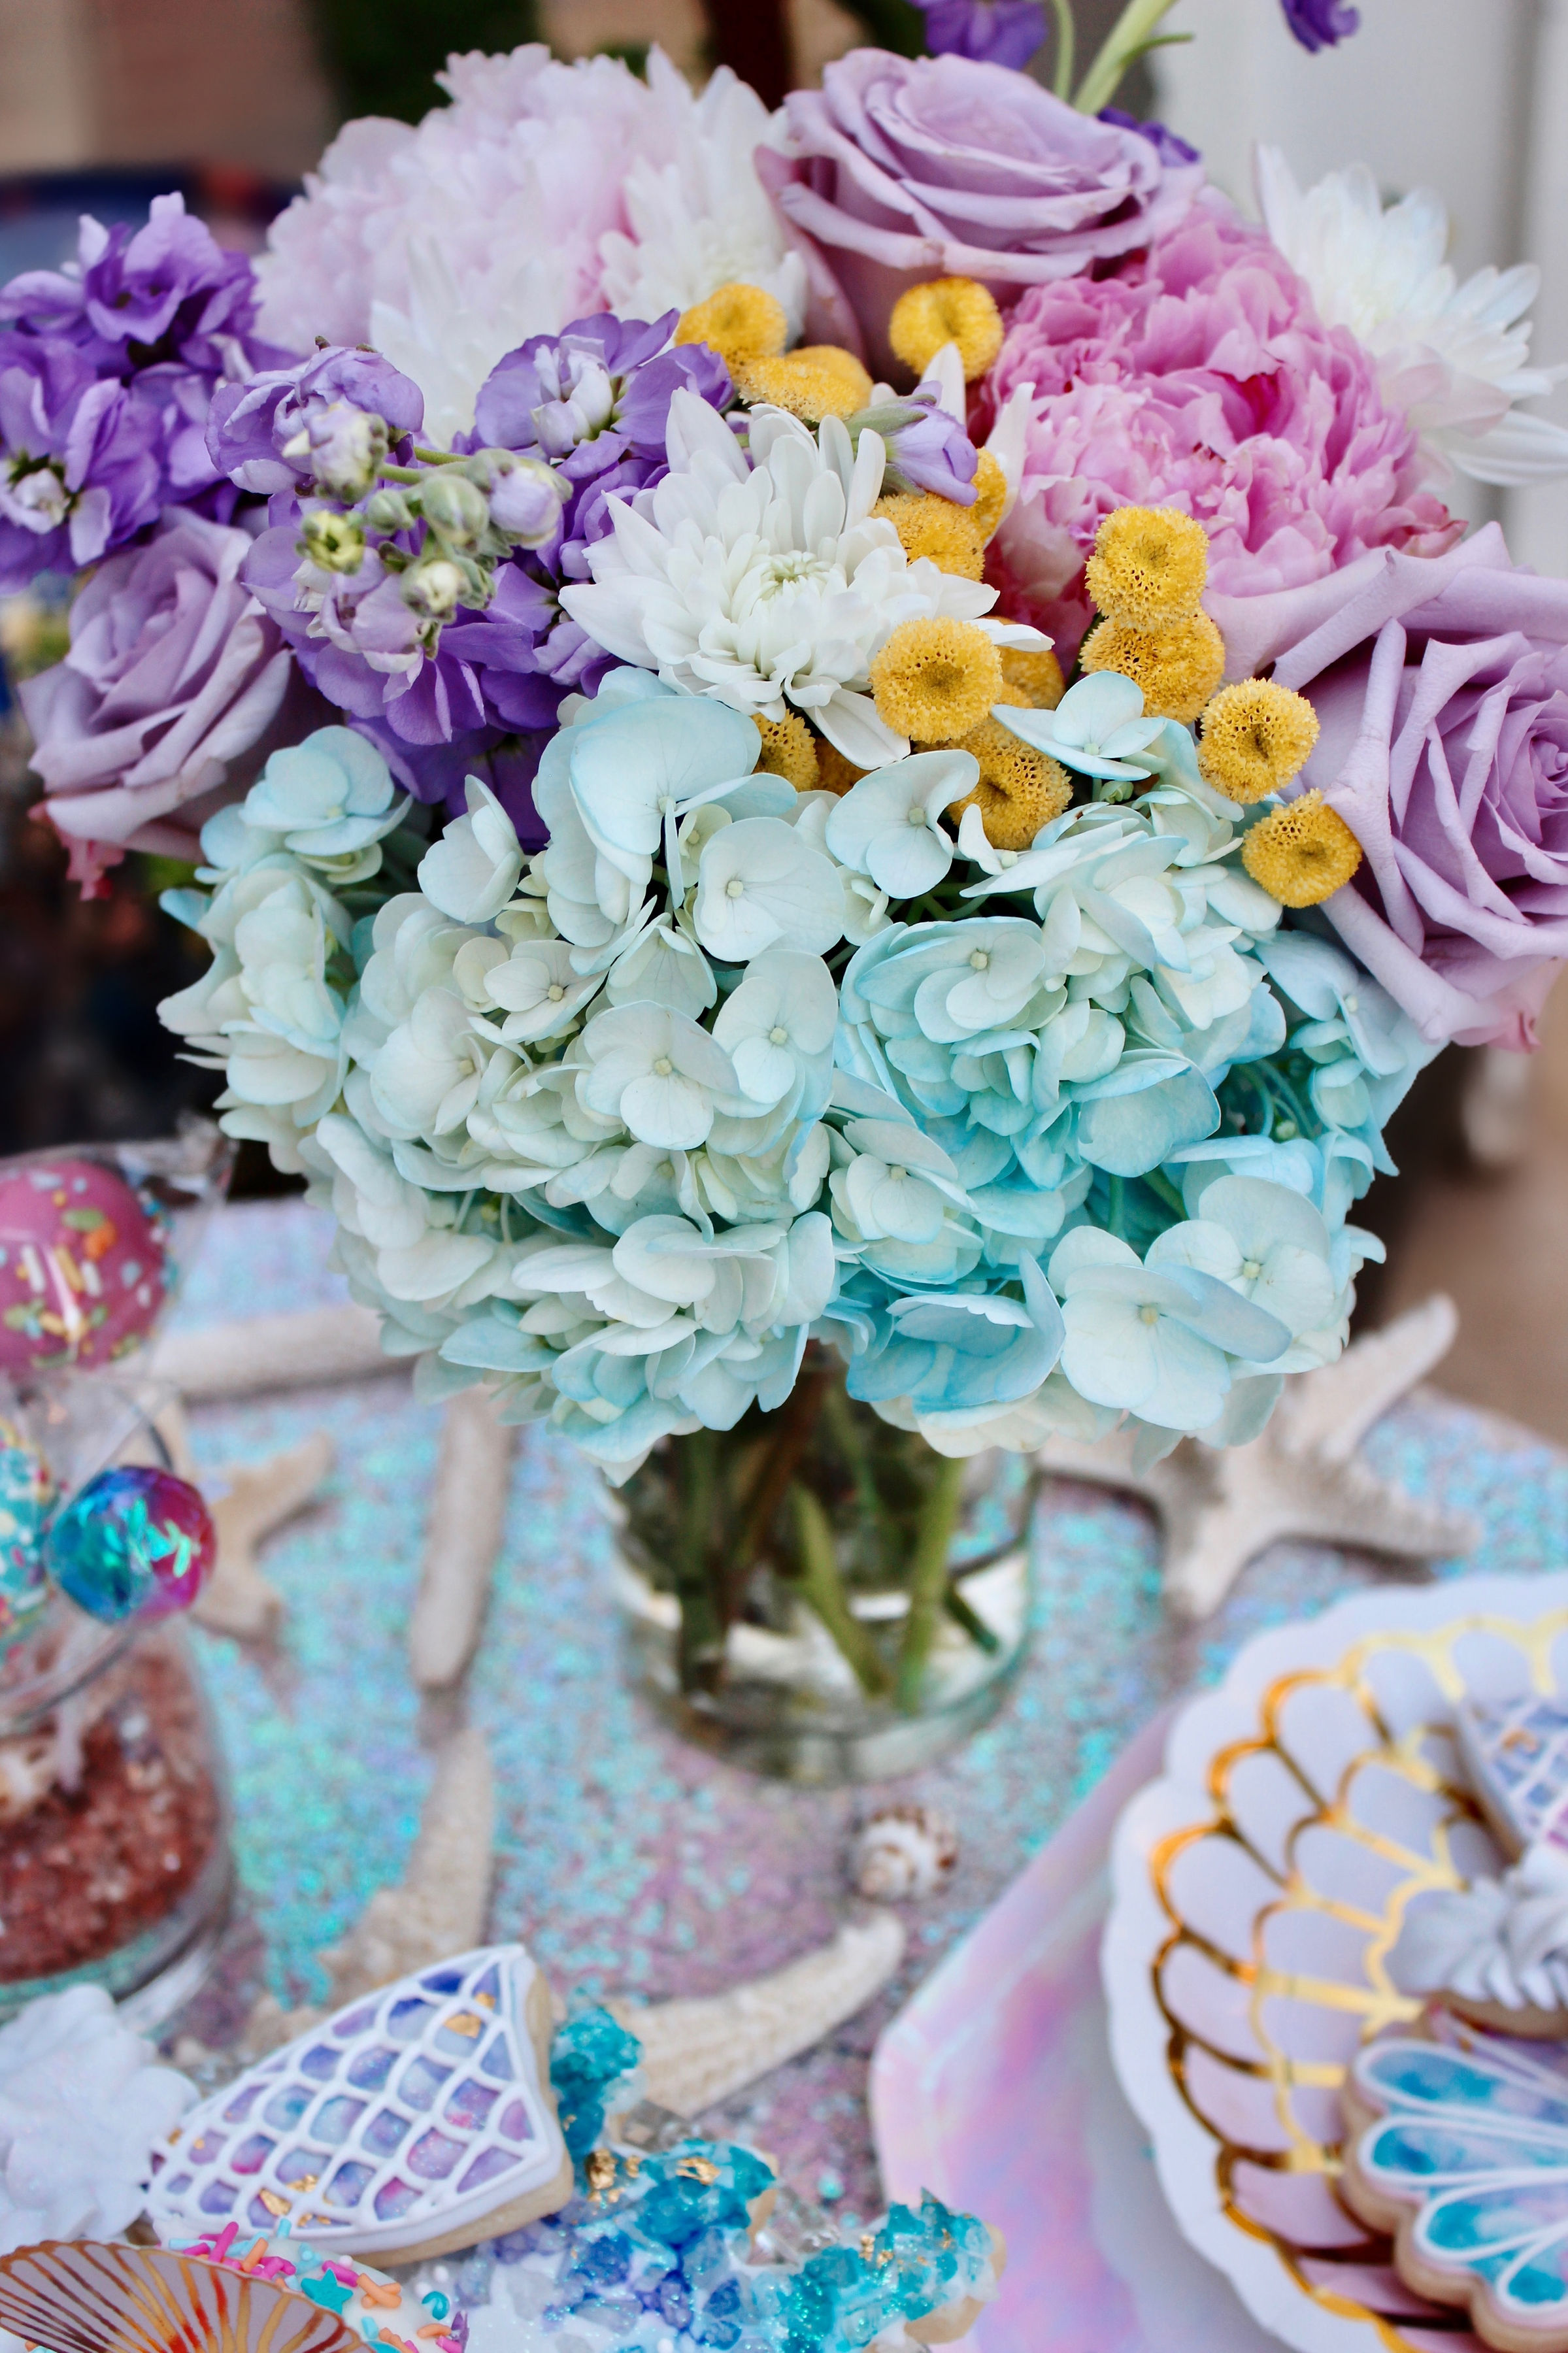 Stunning bouquet for a mermaid party